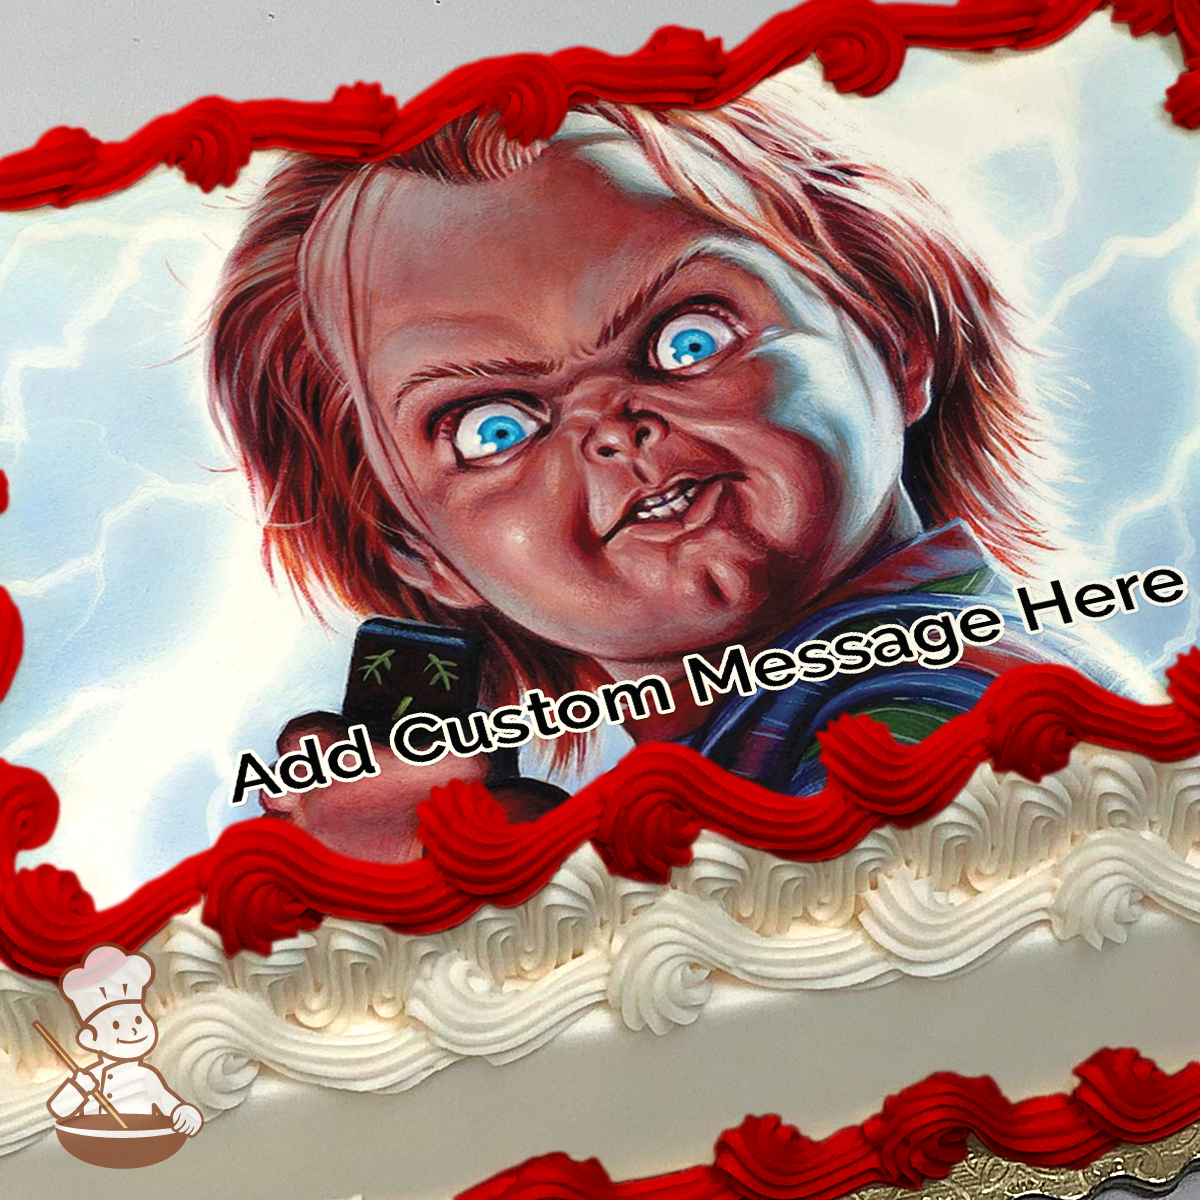 Chucky doll printed on extra cake layer and decorated on sheet cake.